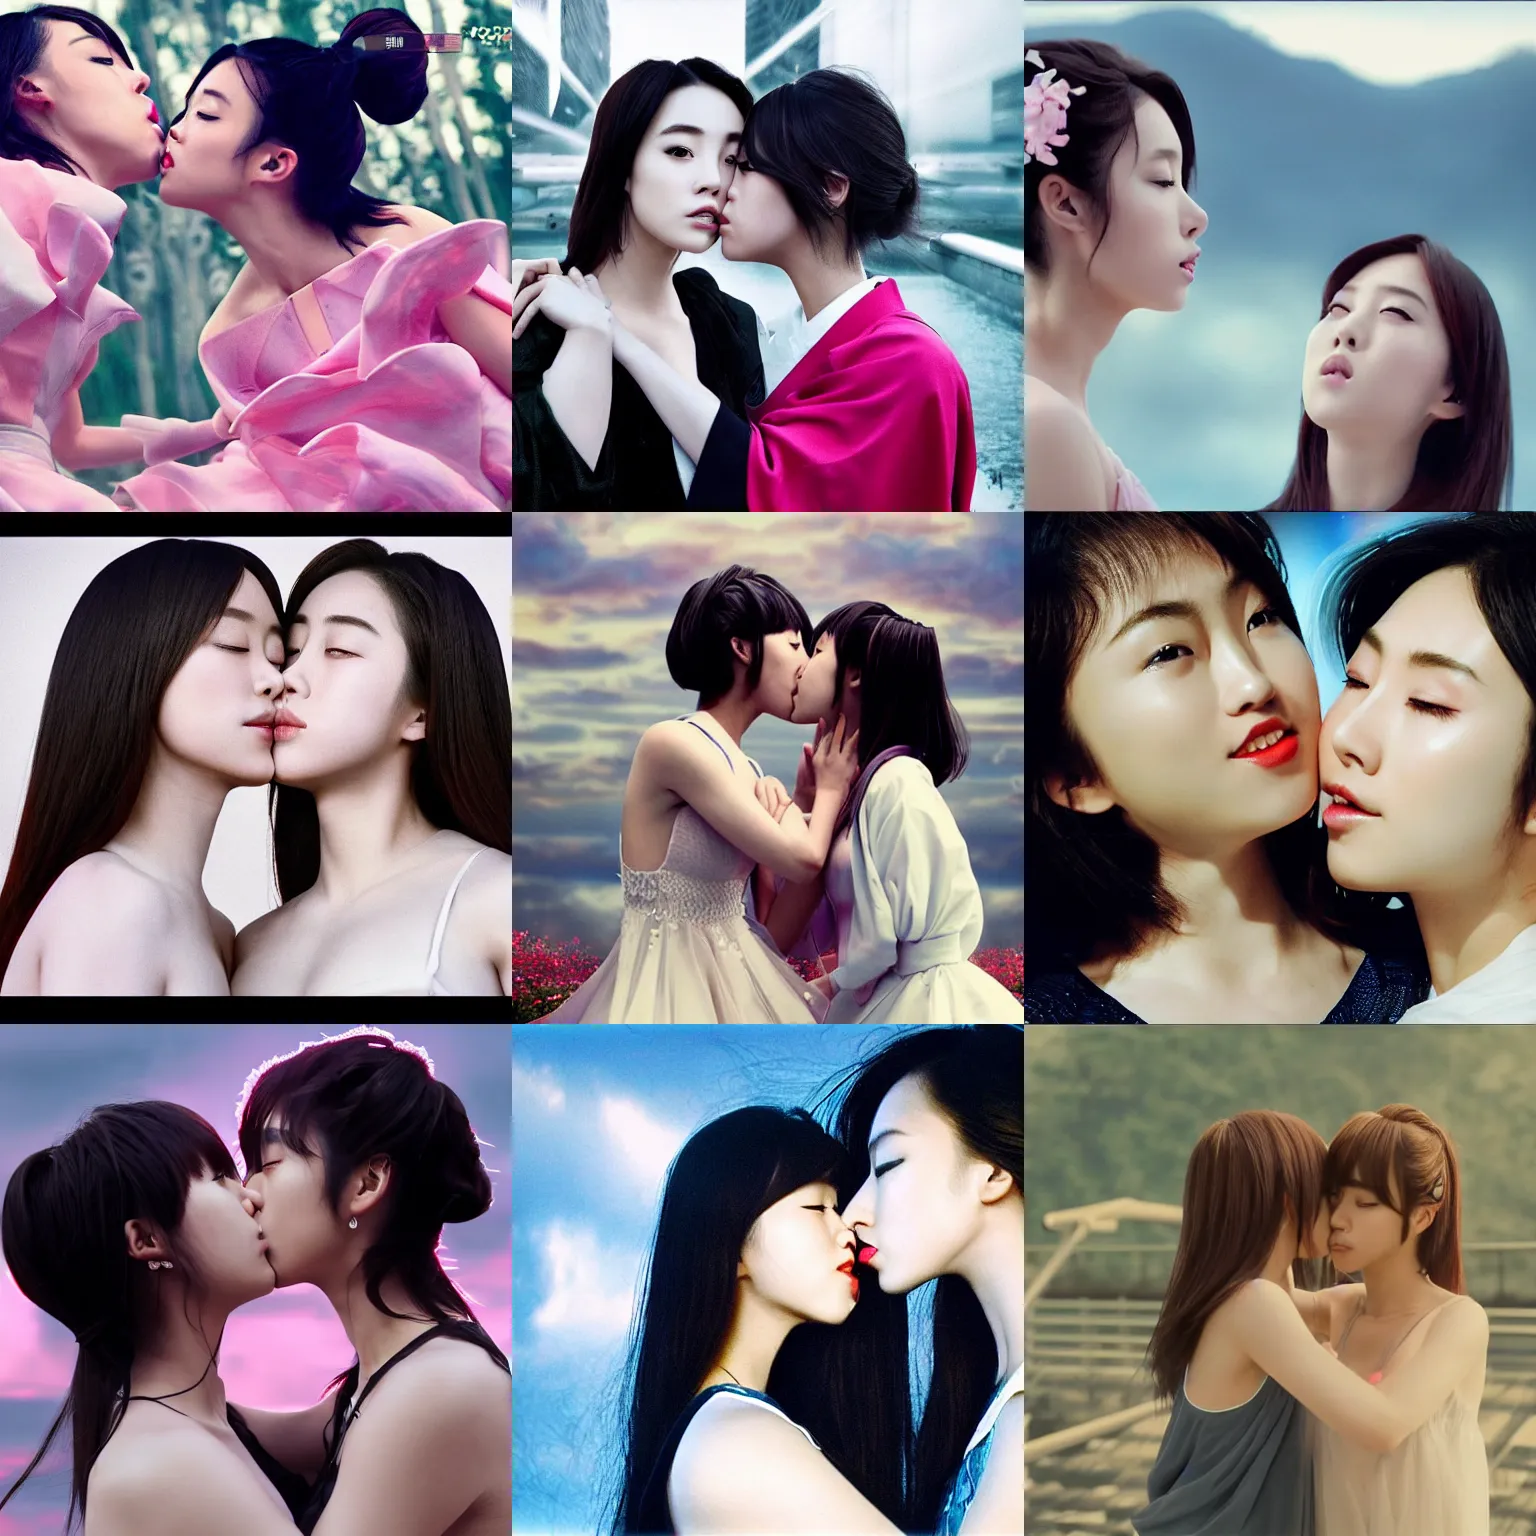 Prompt: unbelievably beautiful, perfect, dynamic, epic, cinematic 8 k hd movie shot, kiss of two japanese beautiful cute young j - pop idols actresses girls, they kiss each other. motion, vfx, inspirational arthouse, high budget, hollywood style, at behance, at netflix, with instagram filters, photoshop, adobe lightroom, adobe after effects, taken with polaroid kodak portra